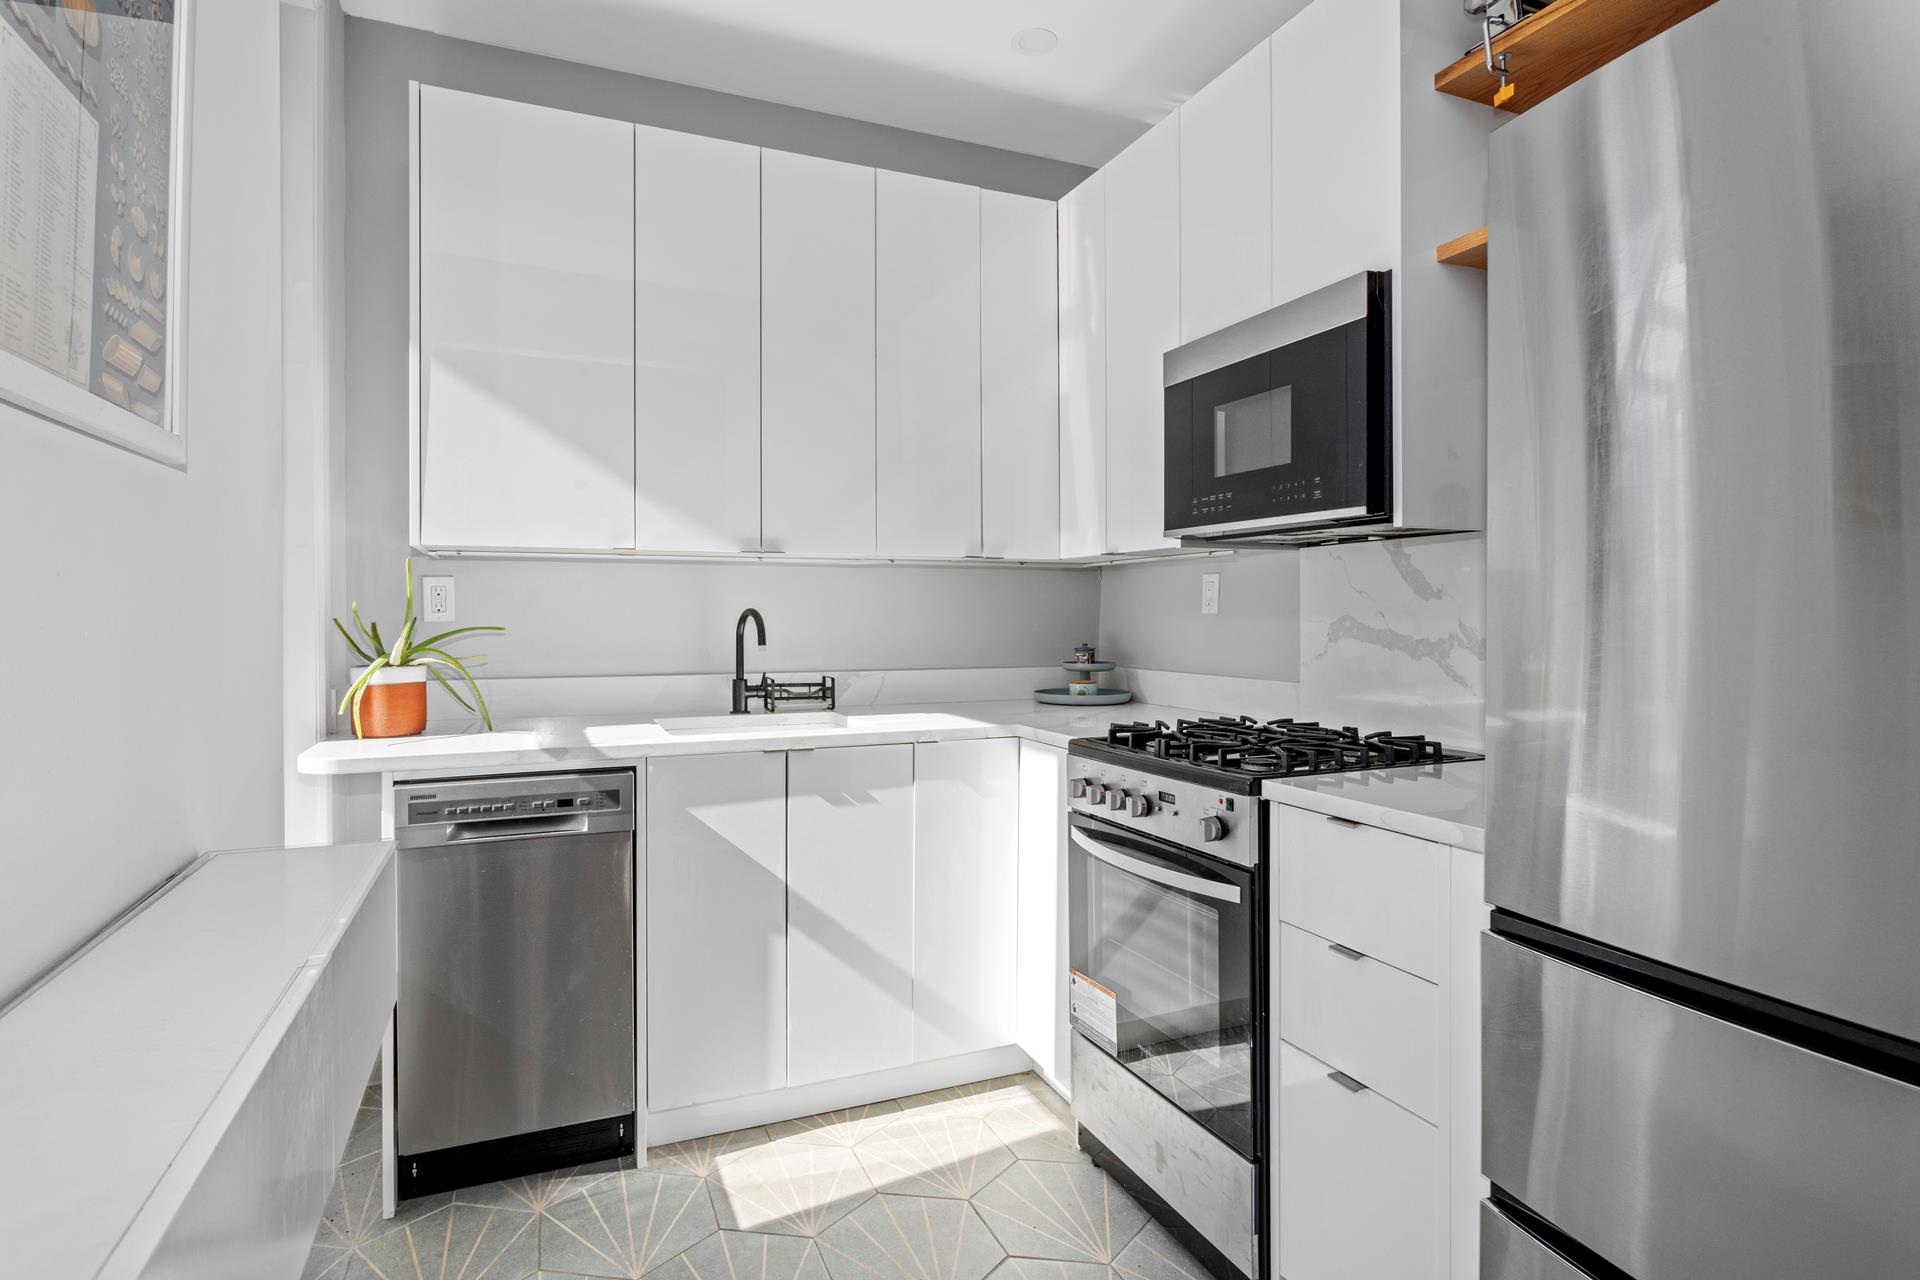 109 West 111th Street 4C, South Harlem, Upper Manhattan, NYC - 2 Bedrooms  
1 Bathrooms  
4 Rooms - 